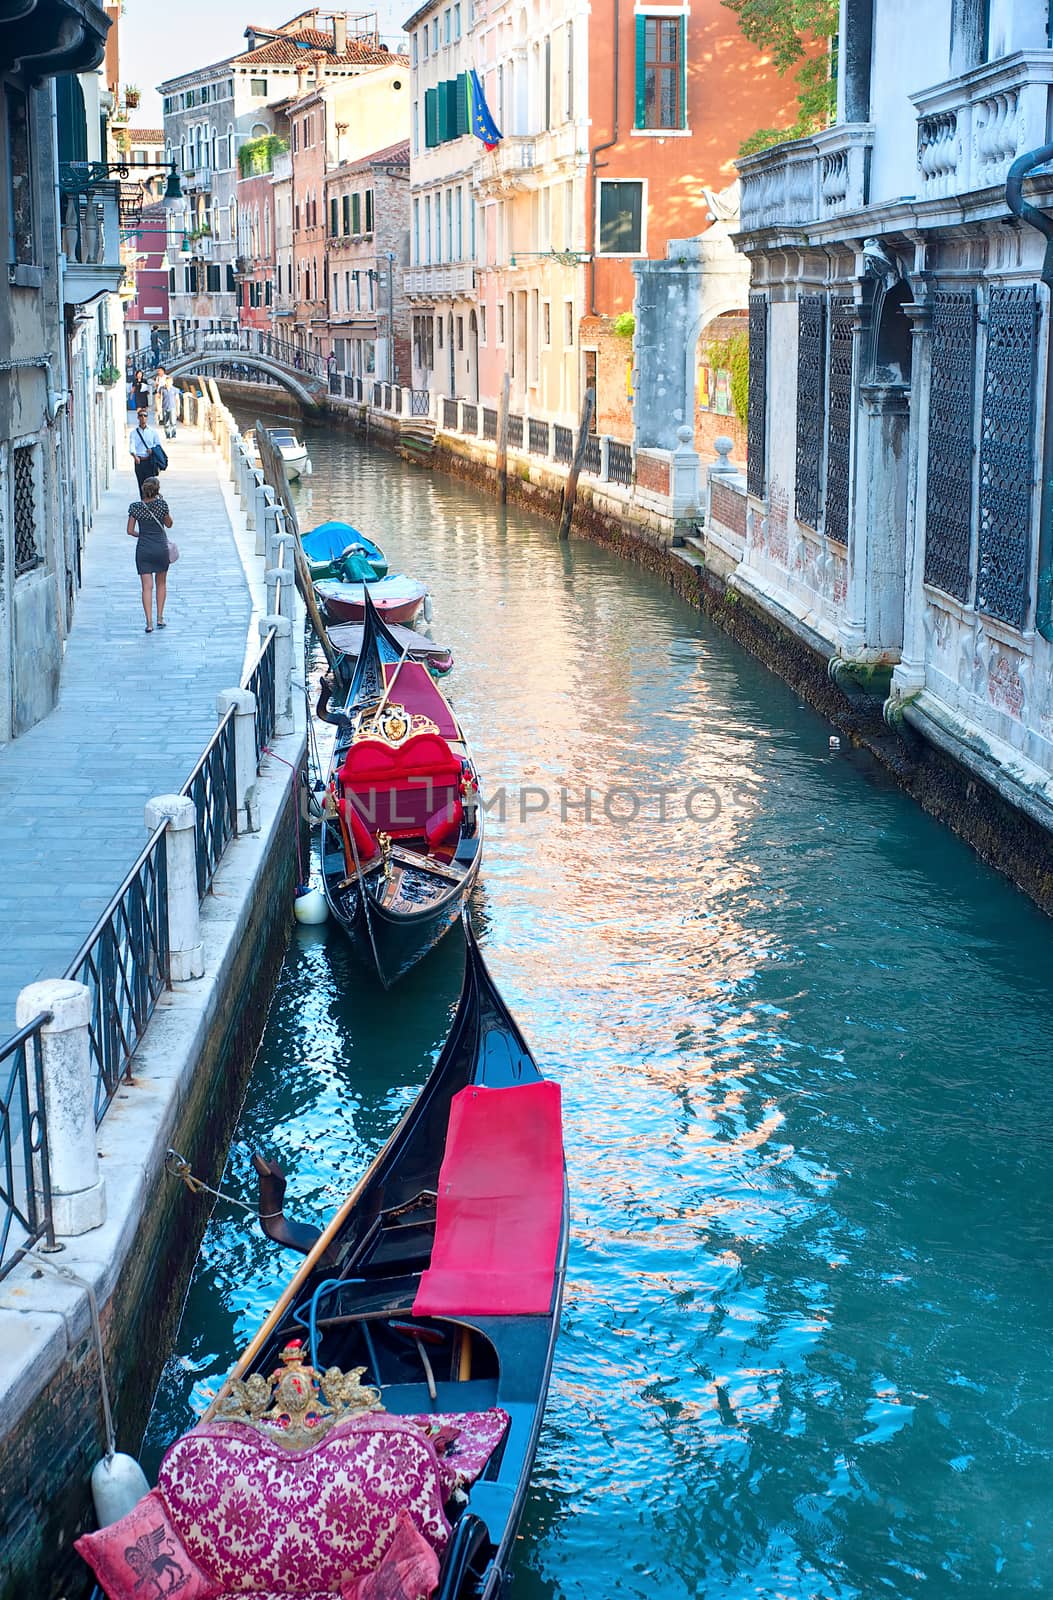 VENICE - SEPTEMBER 6, 2013: Gondolas waiting for tourists on a small Venetian canal  in Venice. More than 20 million tourists come to Venice annually.